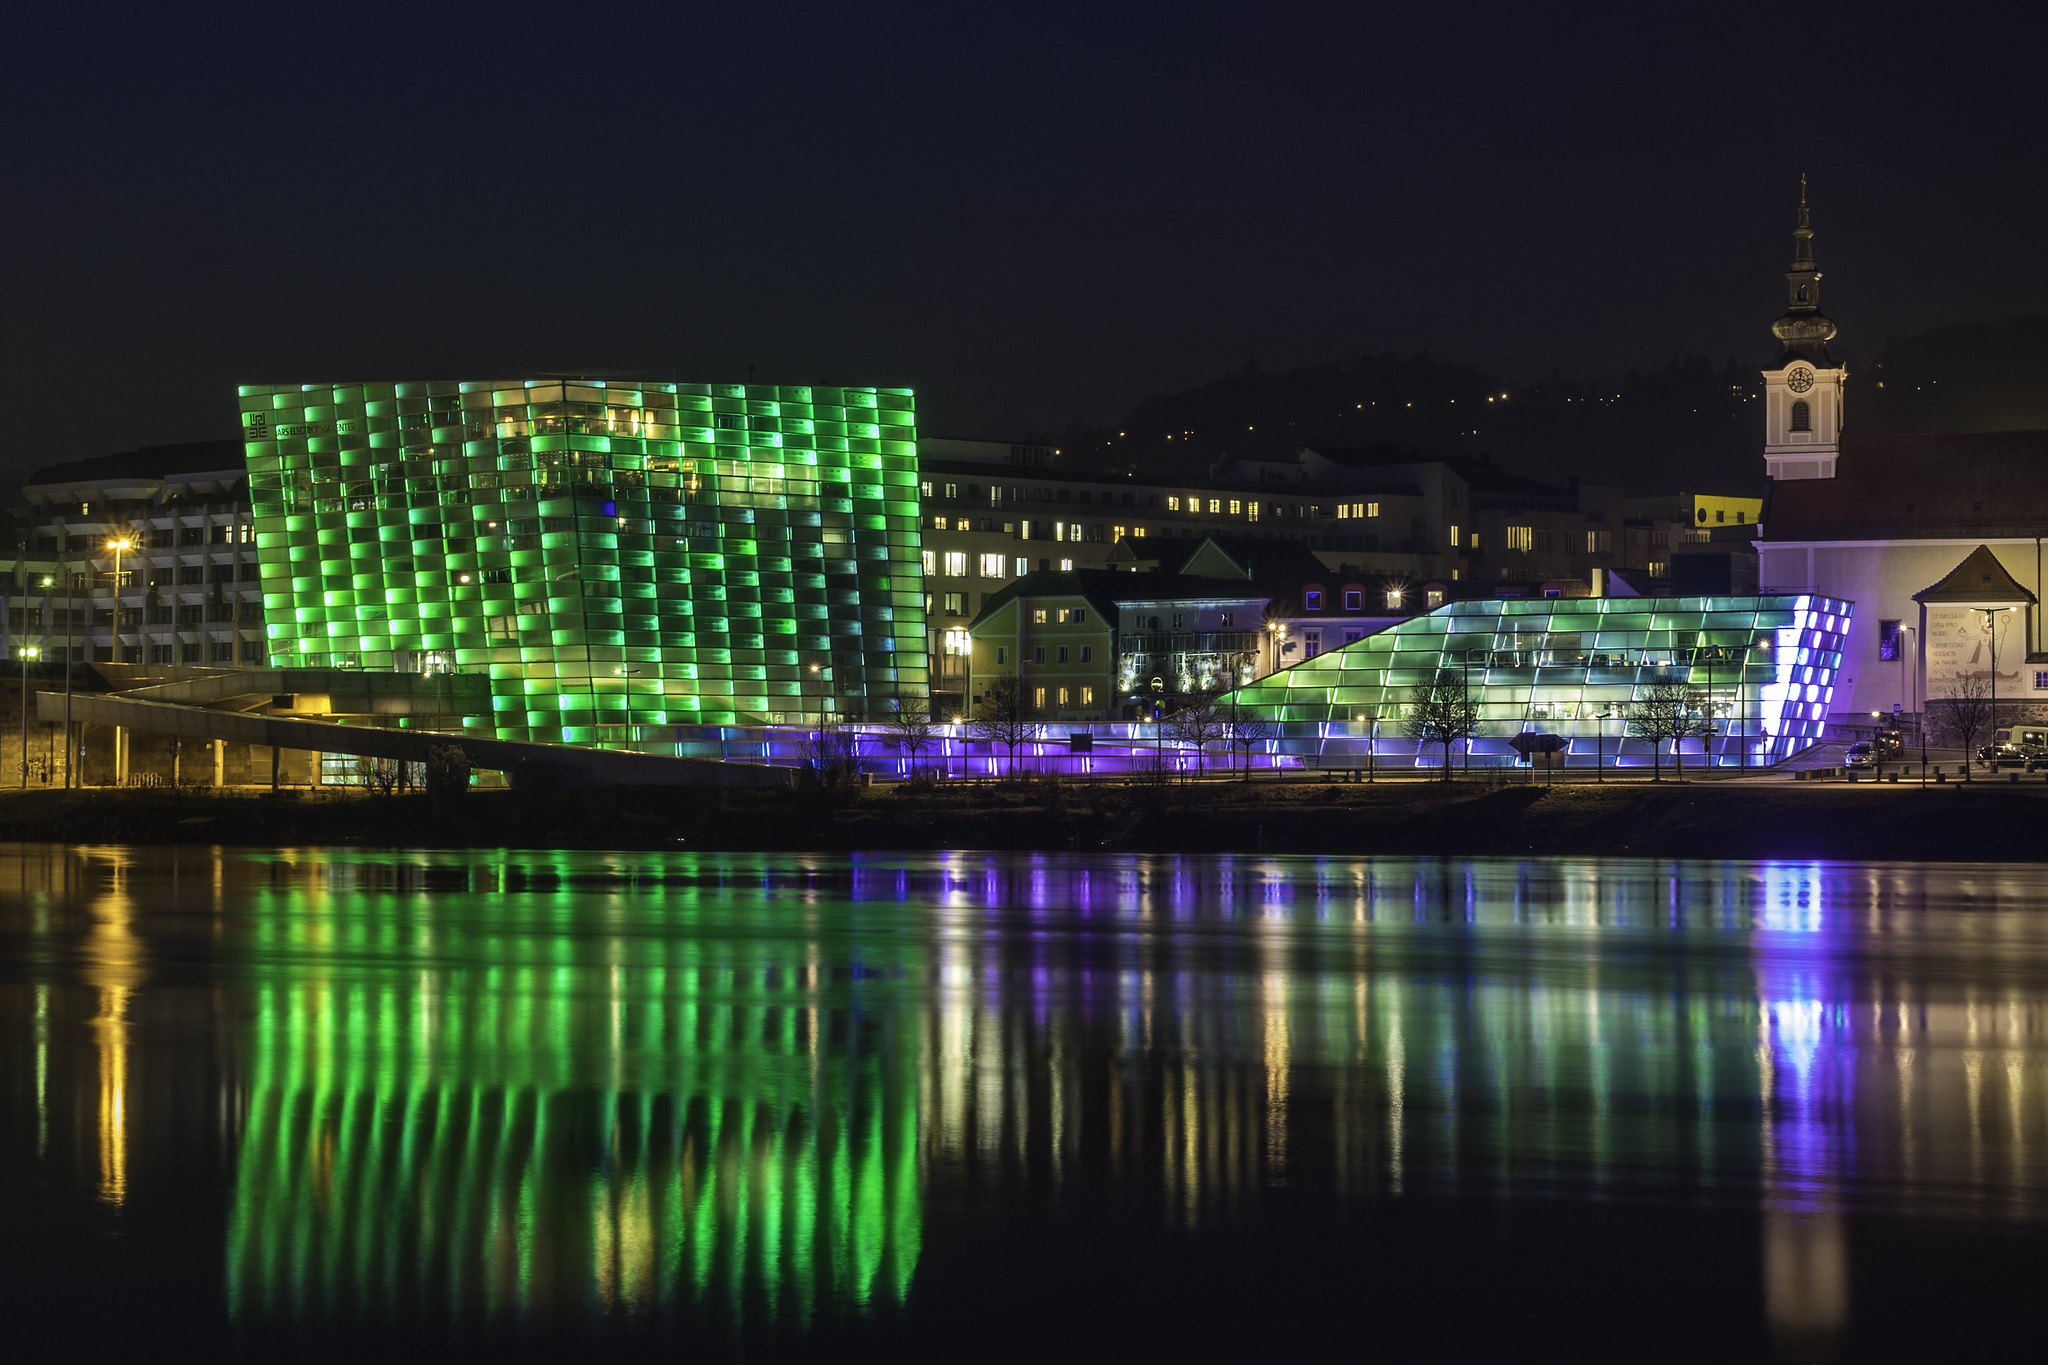 The Ars Electronica building